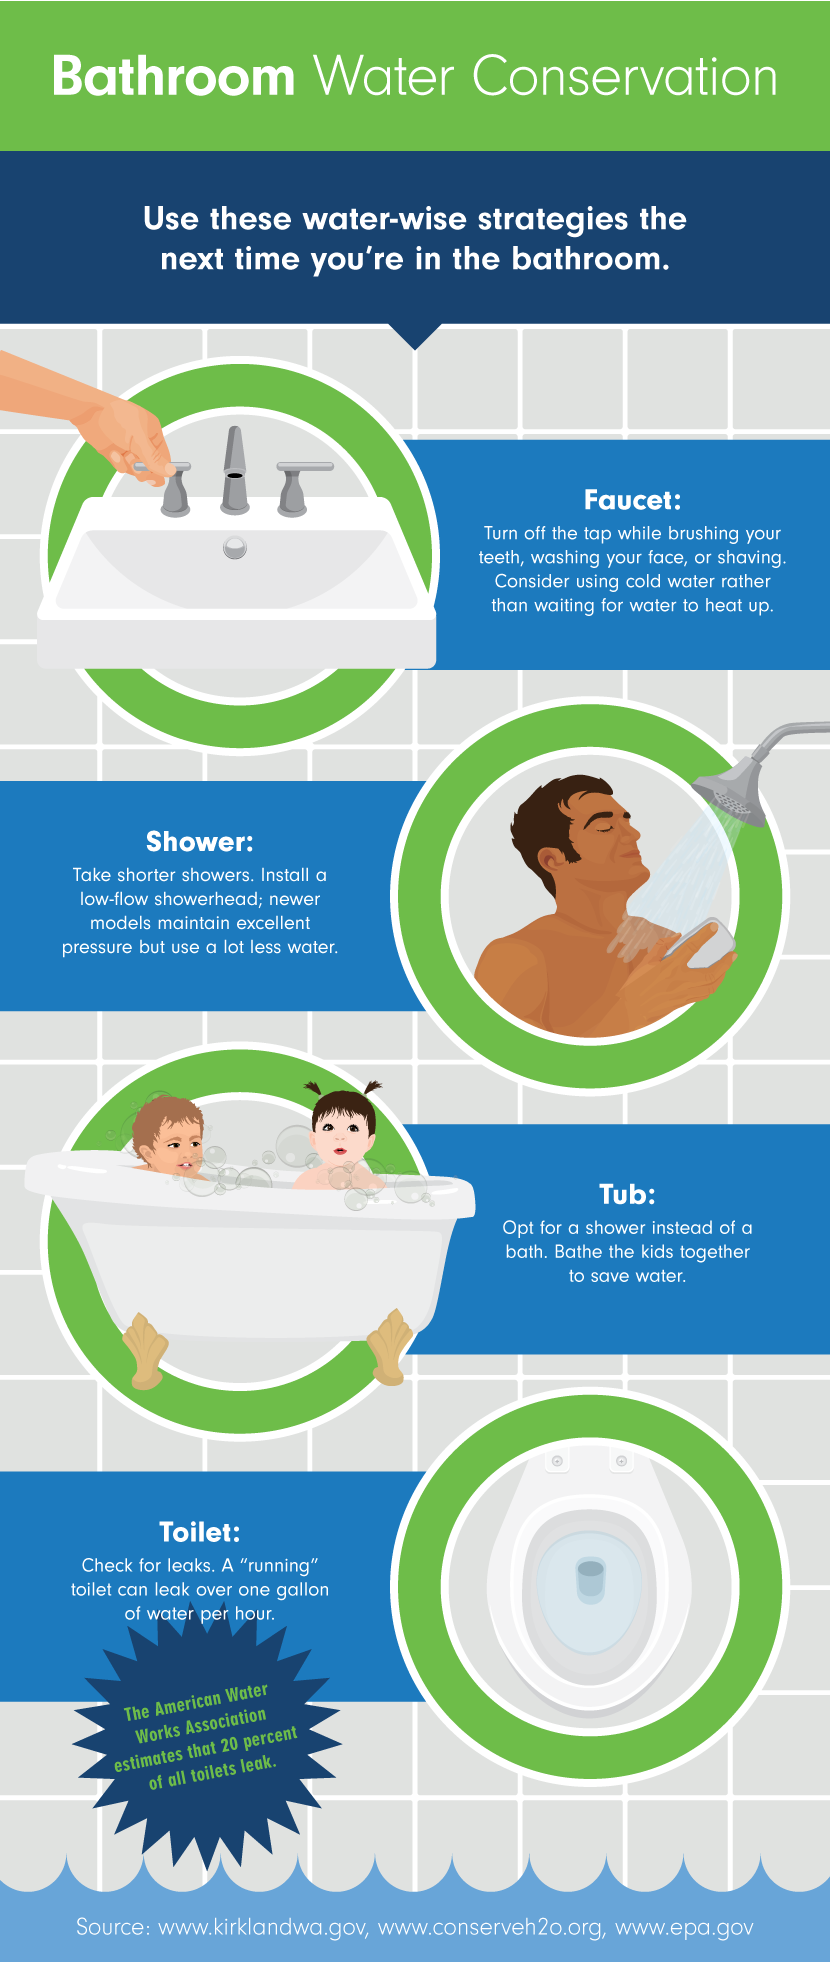 Bathroom Water Conservation - Reduce Water Waste: Simple Solutions for Using Less